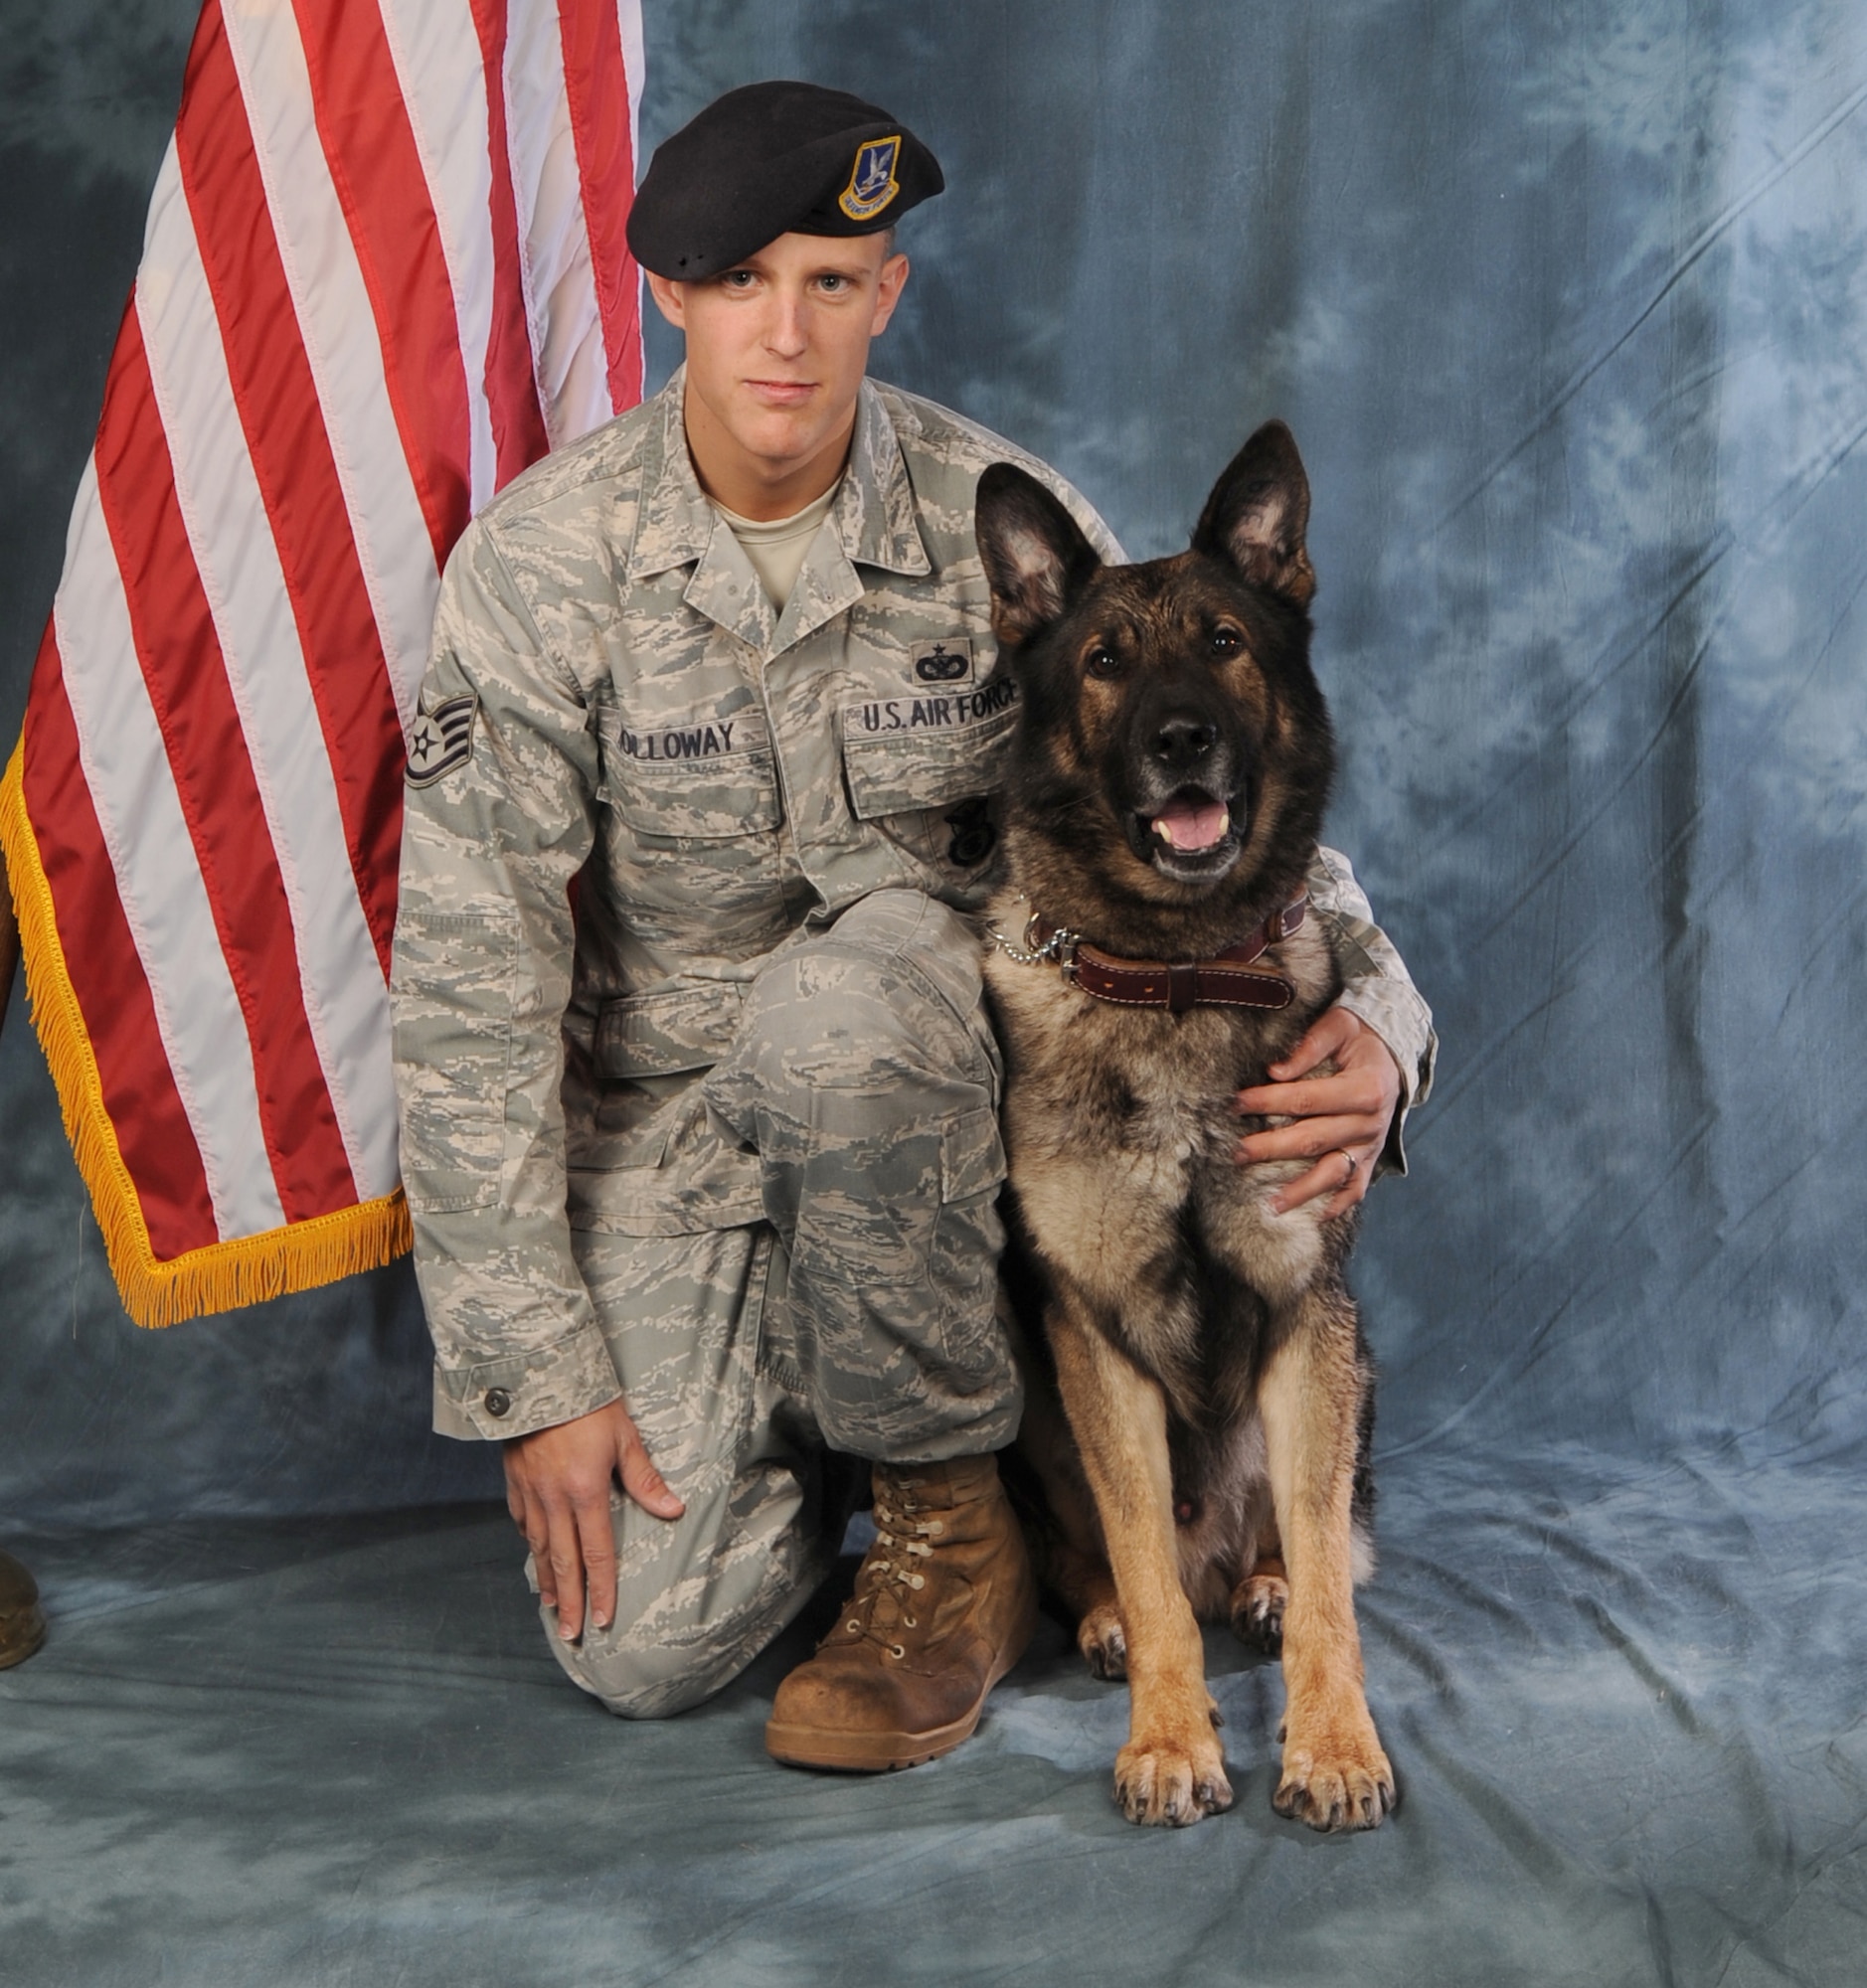 WHITEMAN AIR FORCE BASE, Mo. -- The Exercise Tiger Foundation honored Staff Sgt. Alex Holloway, 509th Security Forces Squadron canine handler, and Filo, a six-year-old Military Working Dog, for the first national Blue Tiger award and were inducted into 2011 National Exercise Tiger Foundation.